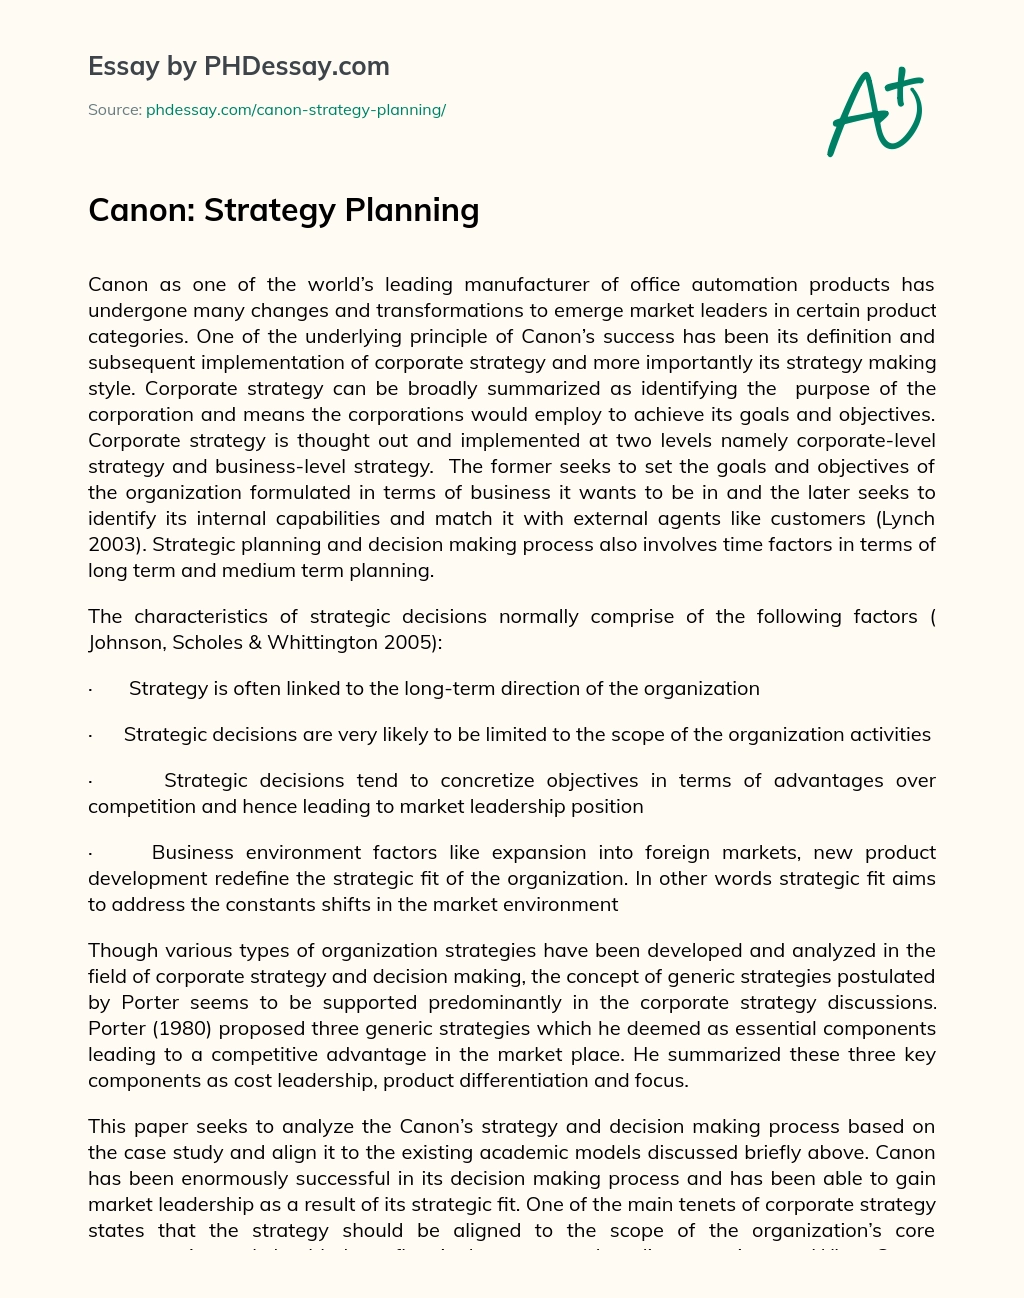 Canon: Strategy Planning essay